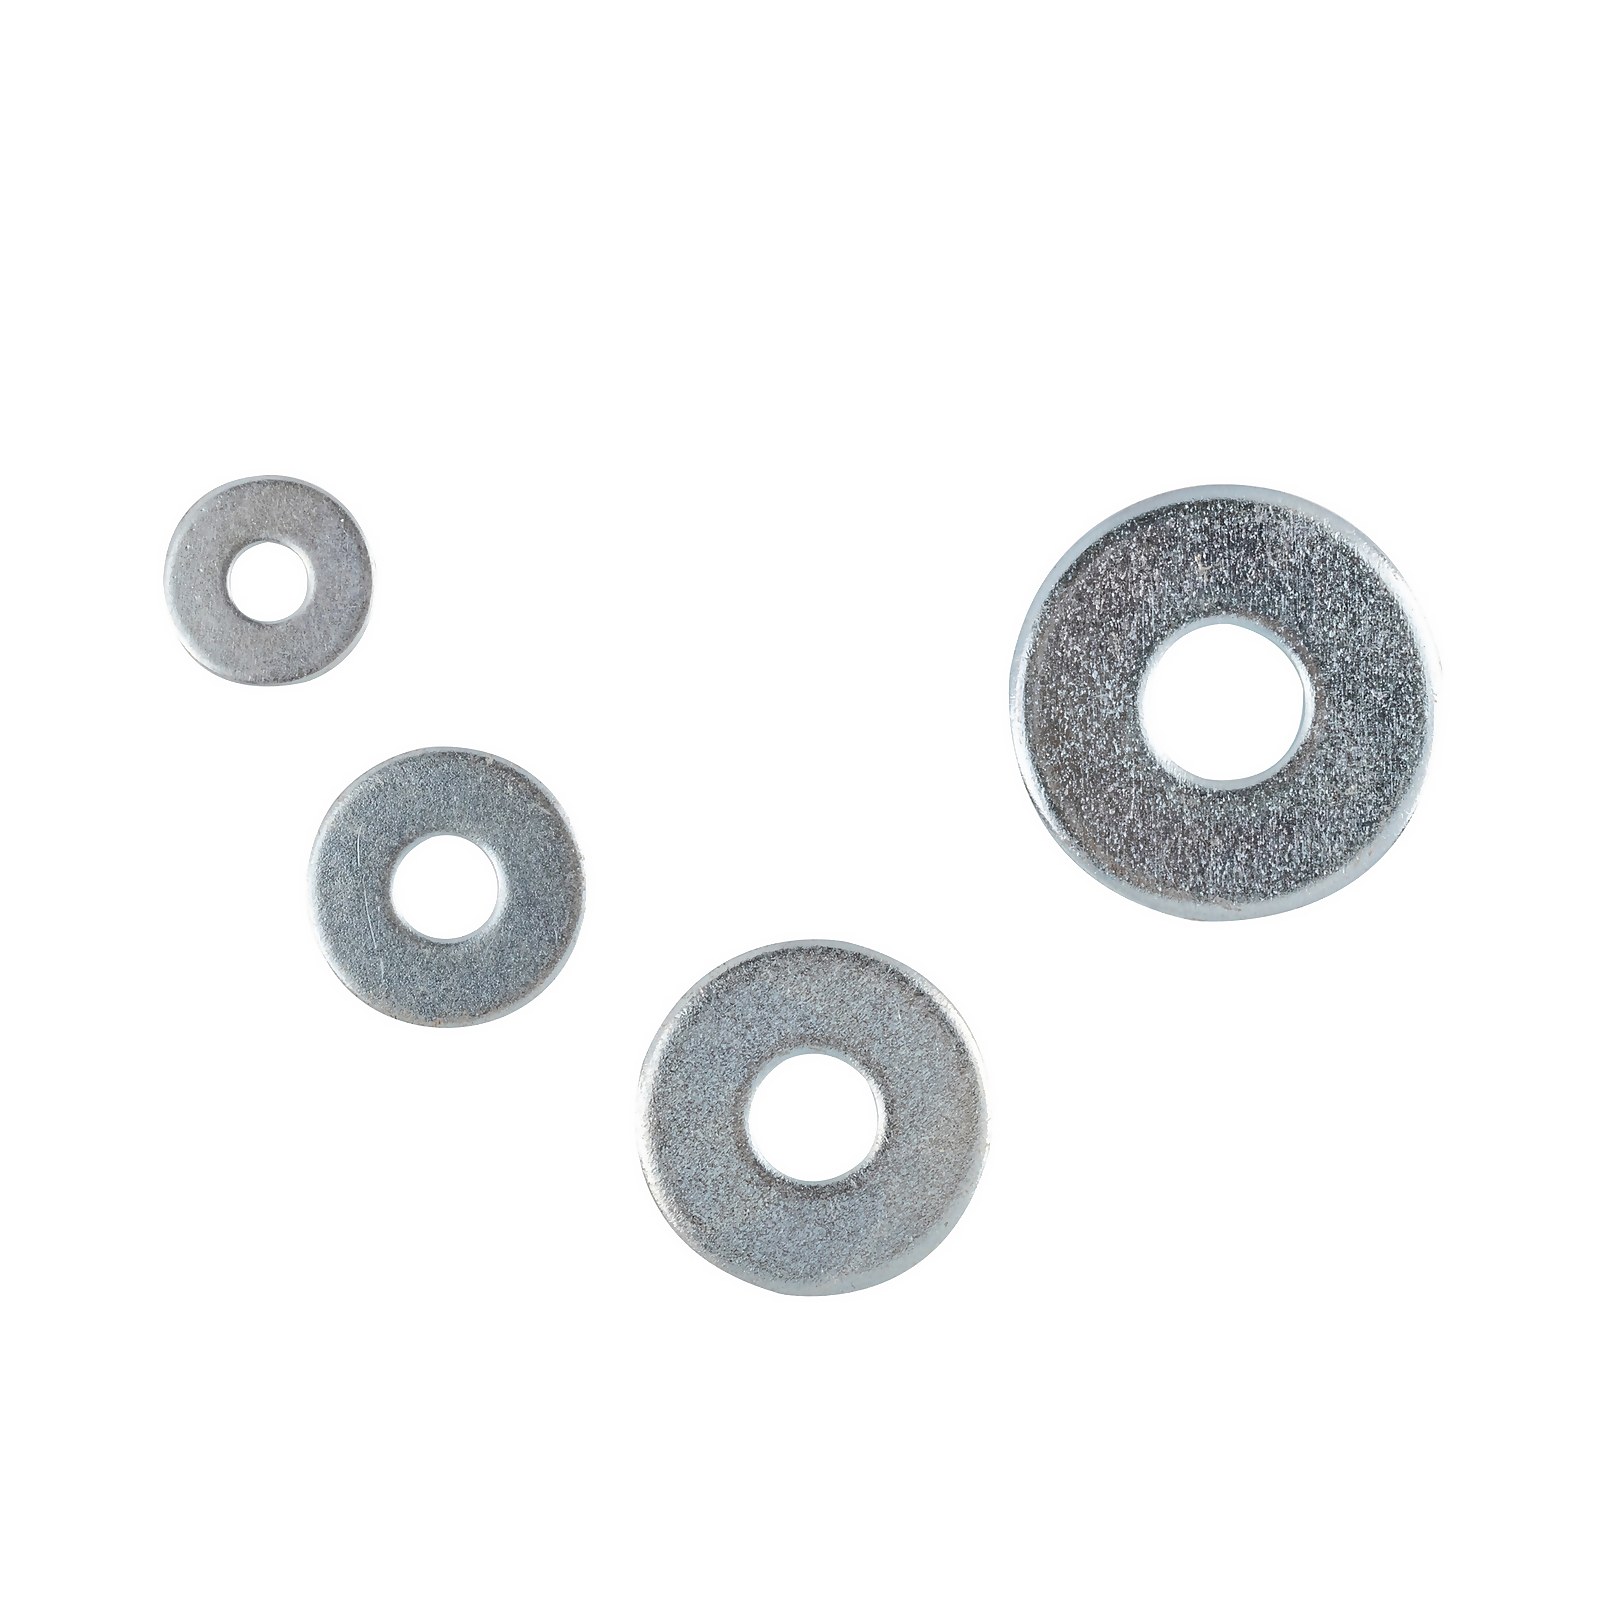 Photo of Homebase Zinc Plated Repair Washer Kit Assorted 65 Pack